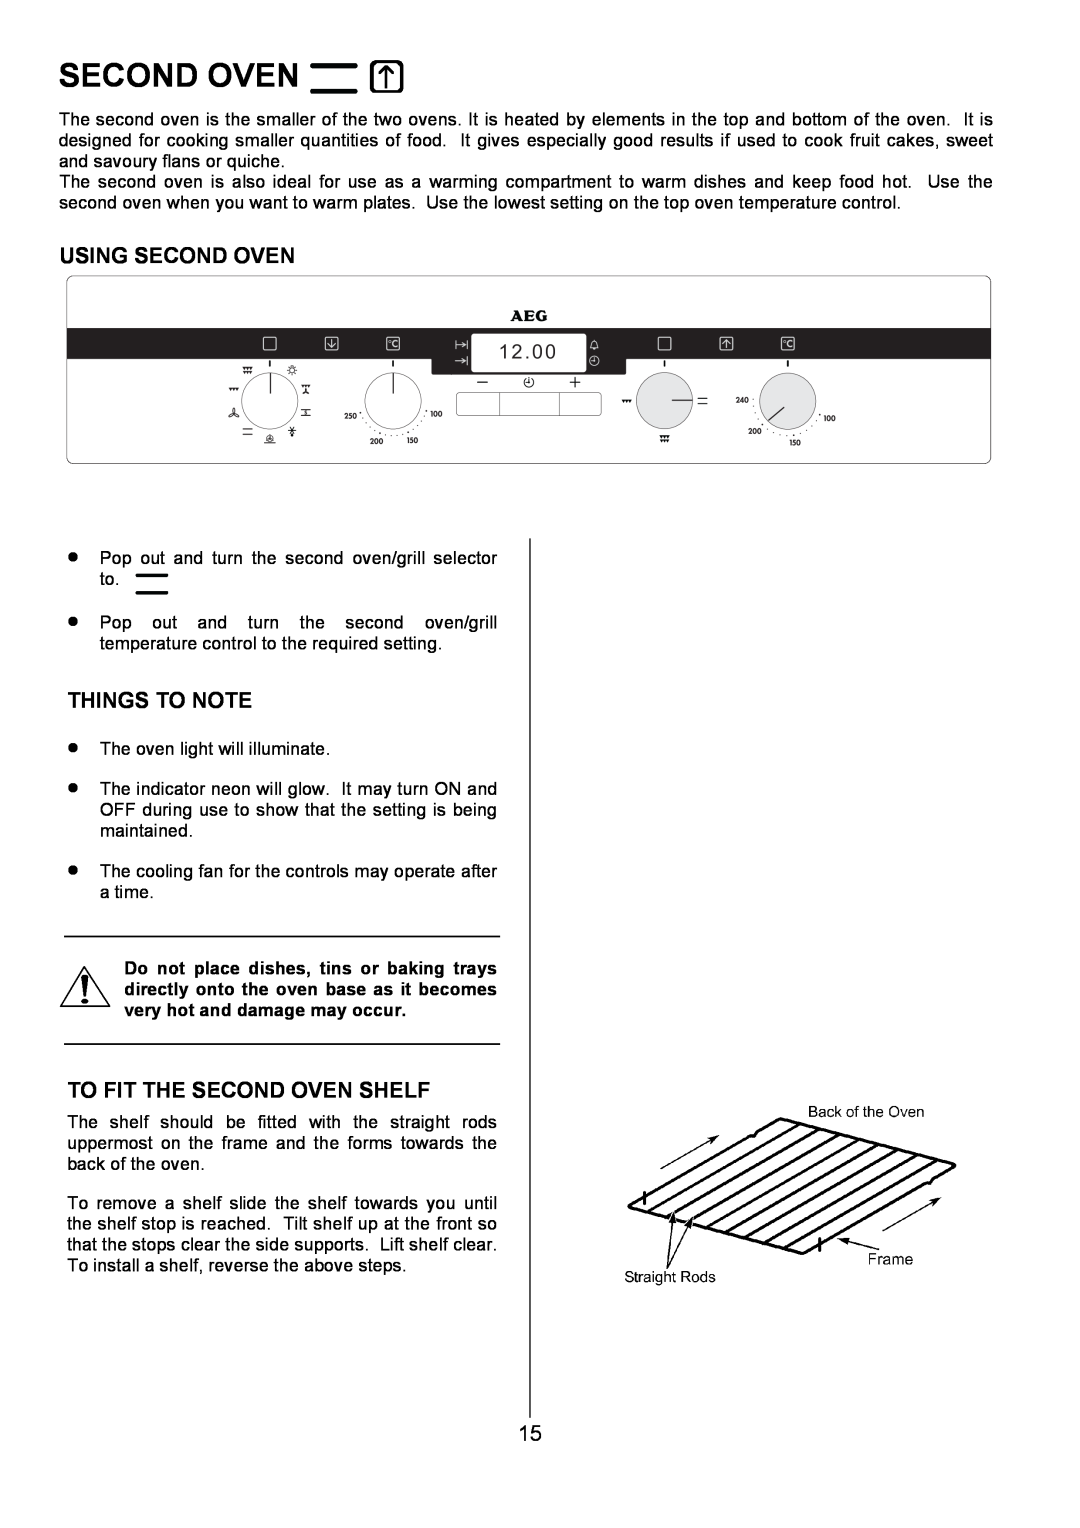 Electrolux D4101-4 operating instructions Using Second Oven, To Fit The Second Oven Shelf, Things To Note 